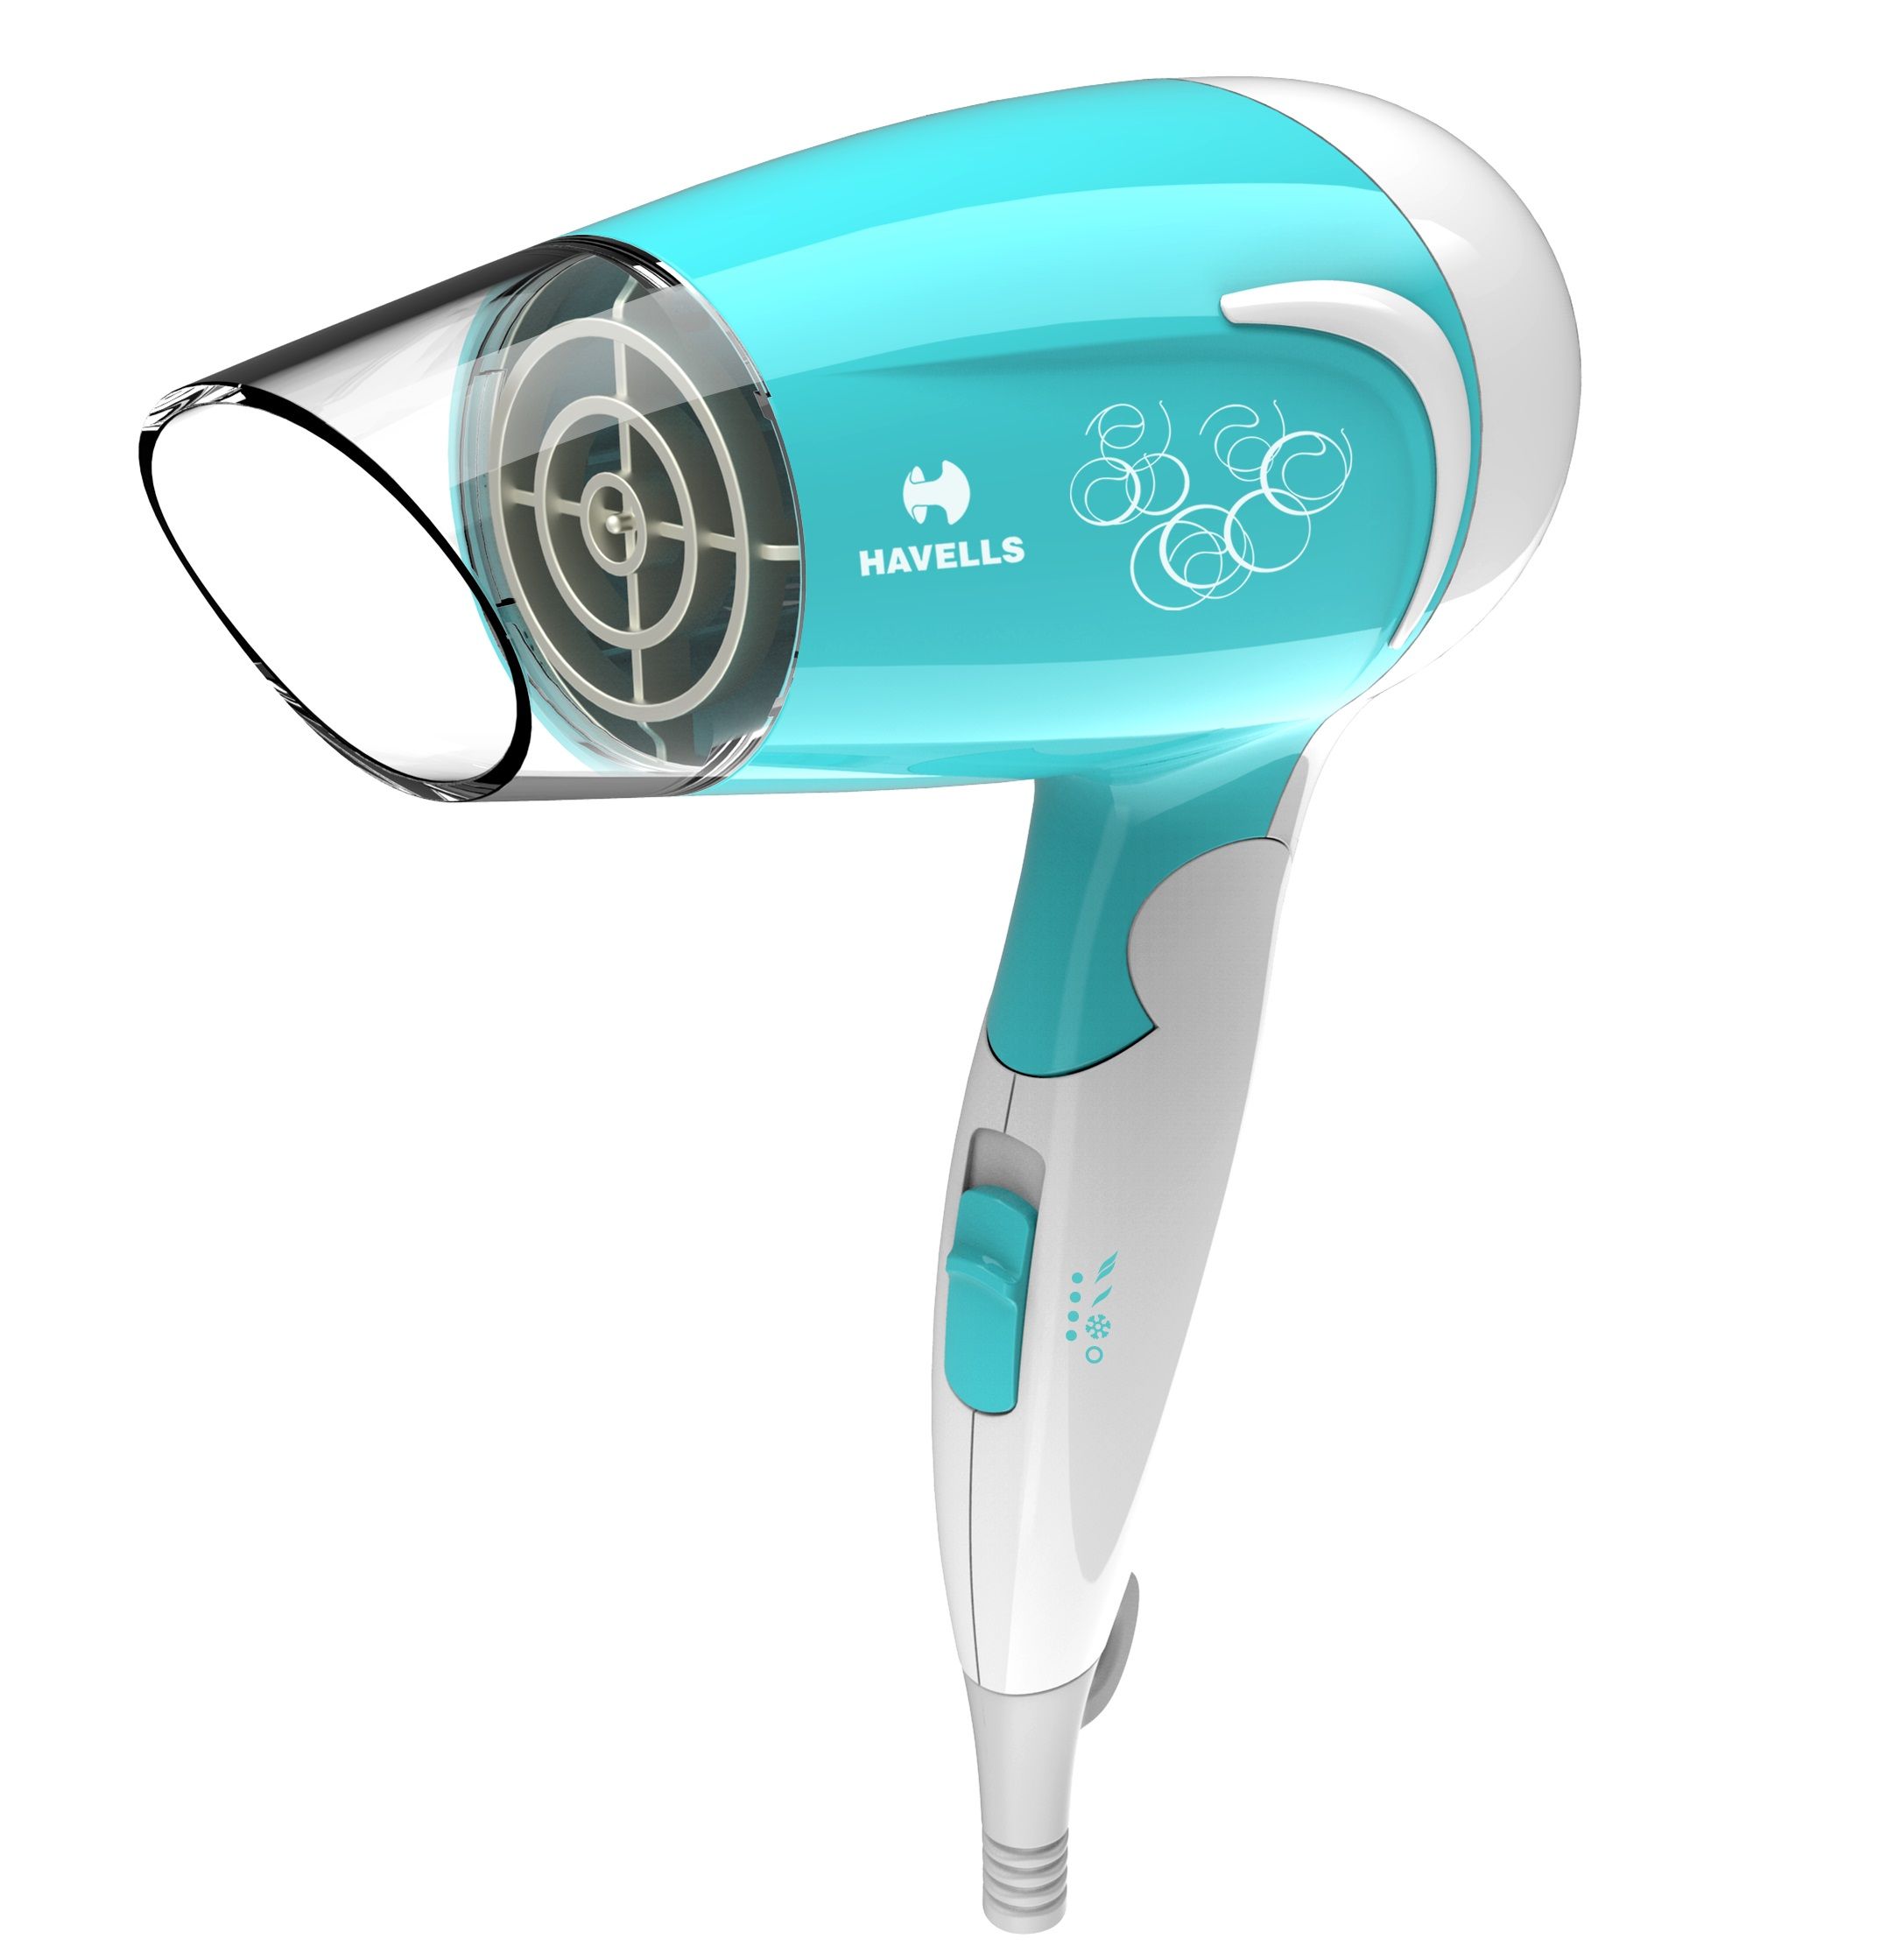 Havells HD3151 Hair Dryer - Turqise Blue